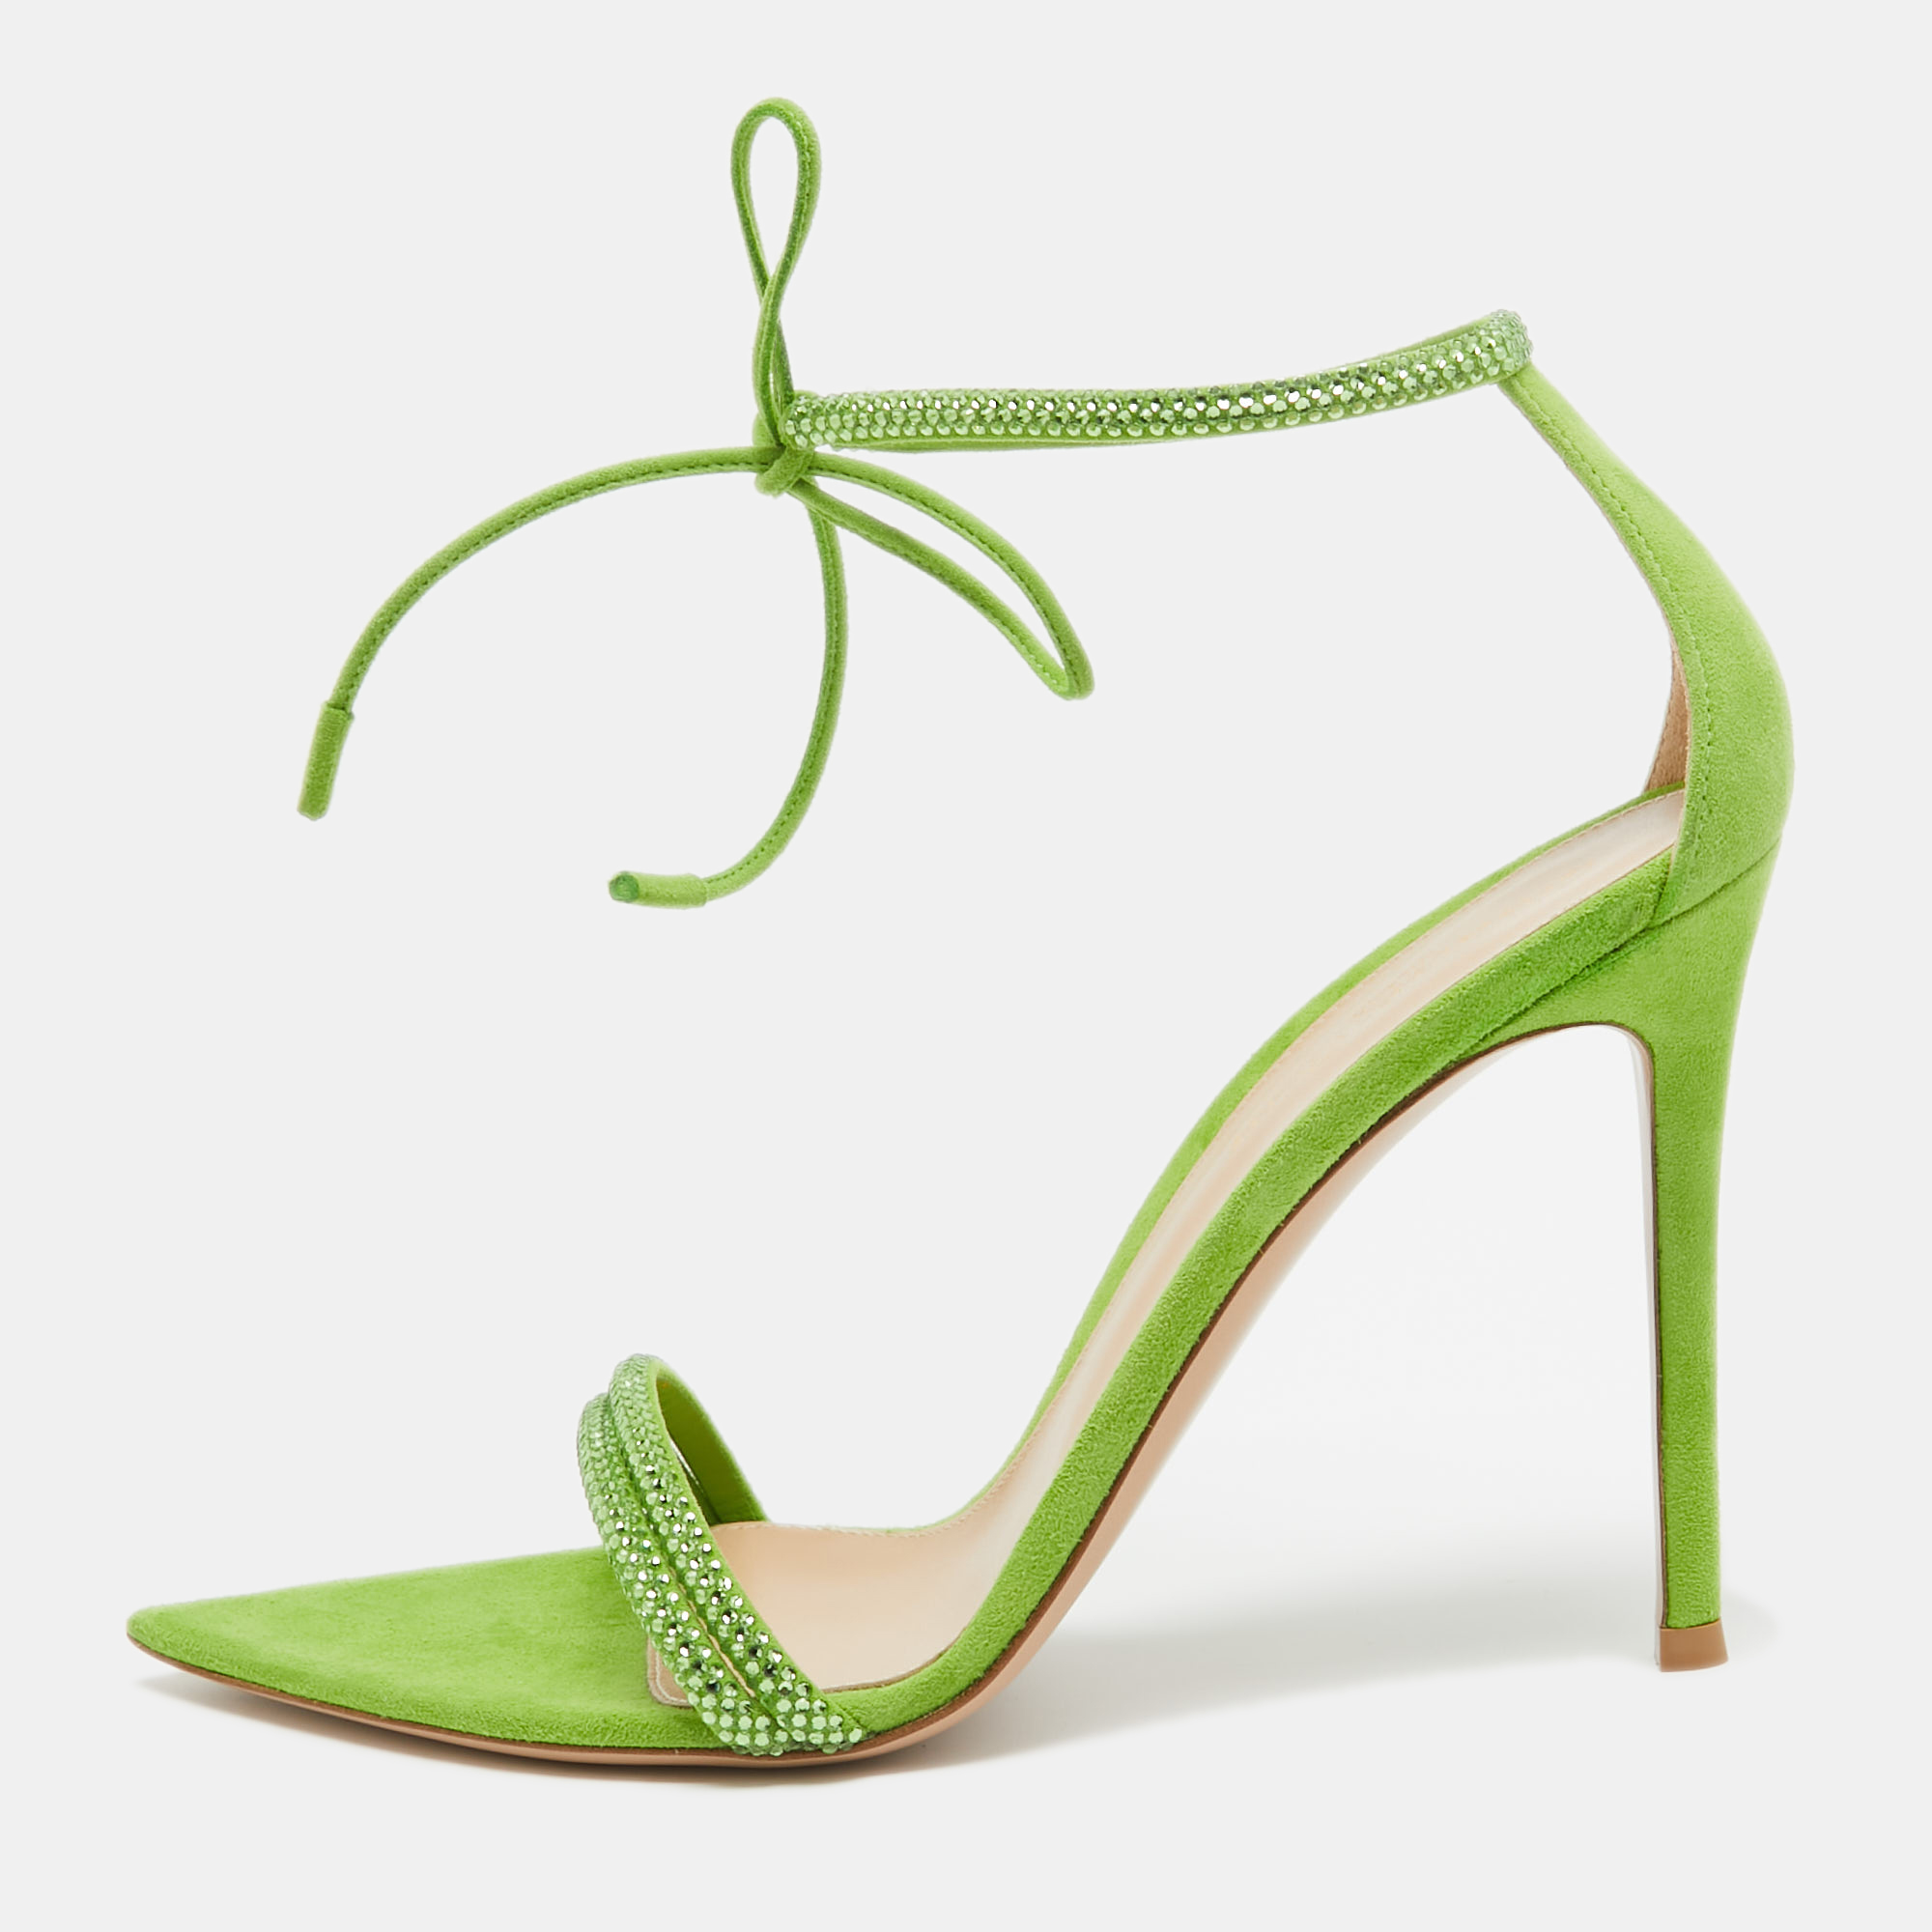 In classy green suede the Gianvito Rossi Montecarlo sandals exude confident charm. Delicate straps gracefully embrace the foot while a sturdy heel provides stability and style. With impeccable craftsmanship and timeless design these sandals effortlessly command attention adding a bold statement to any ensemble